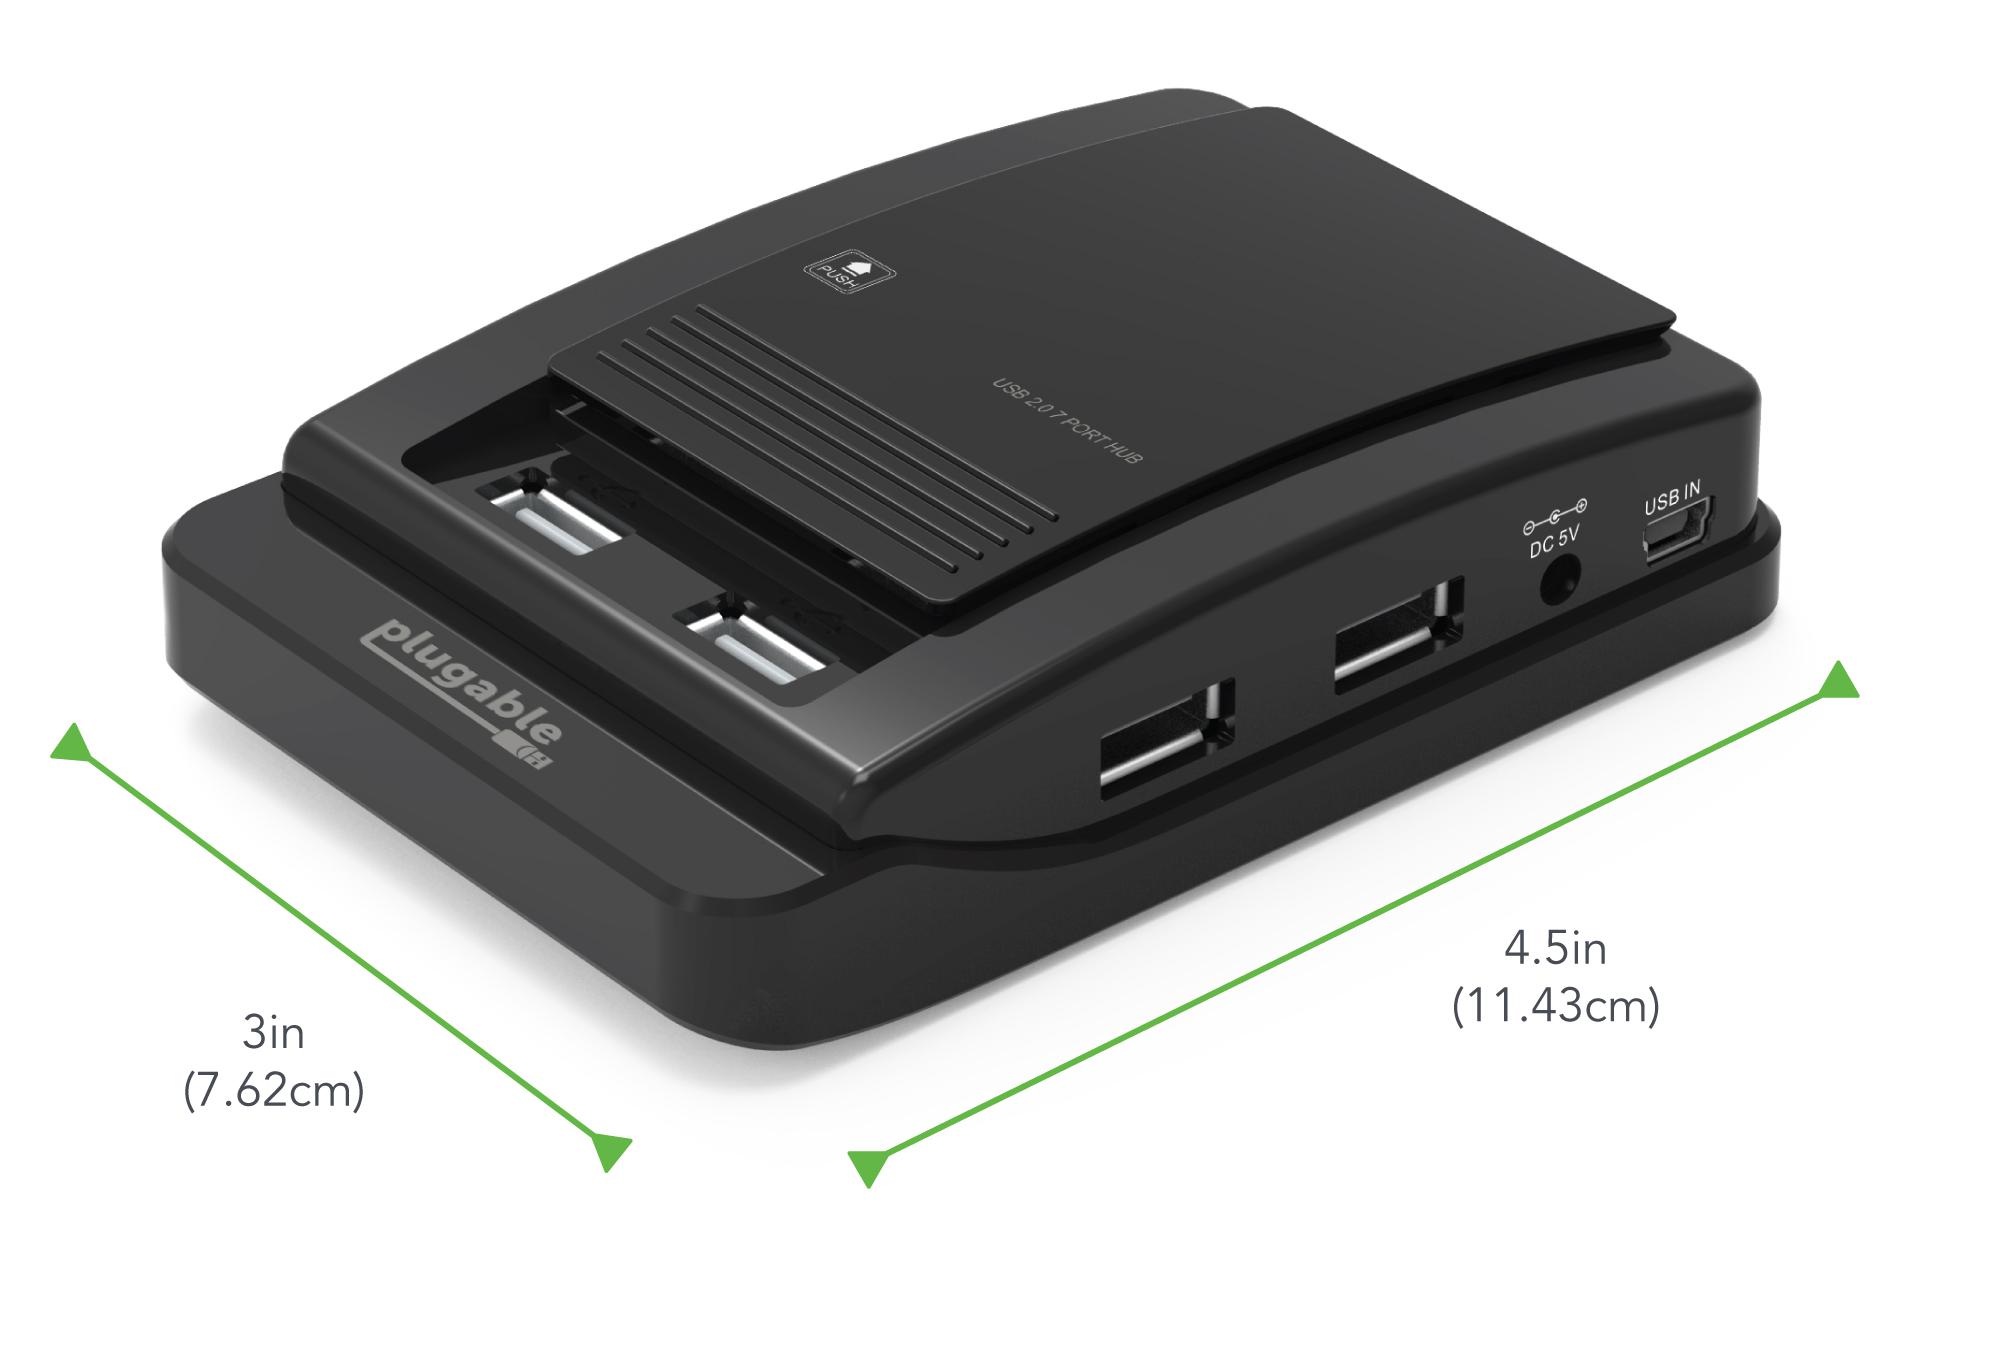 Plugable USB 2.0 7-Port High Speed Hub with 15W Power Adapter - image 5 of 7